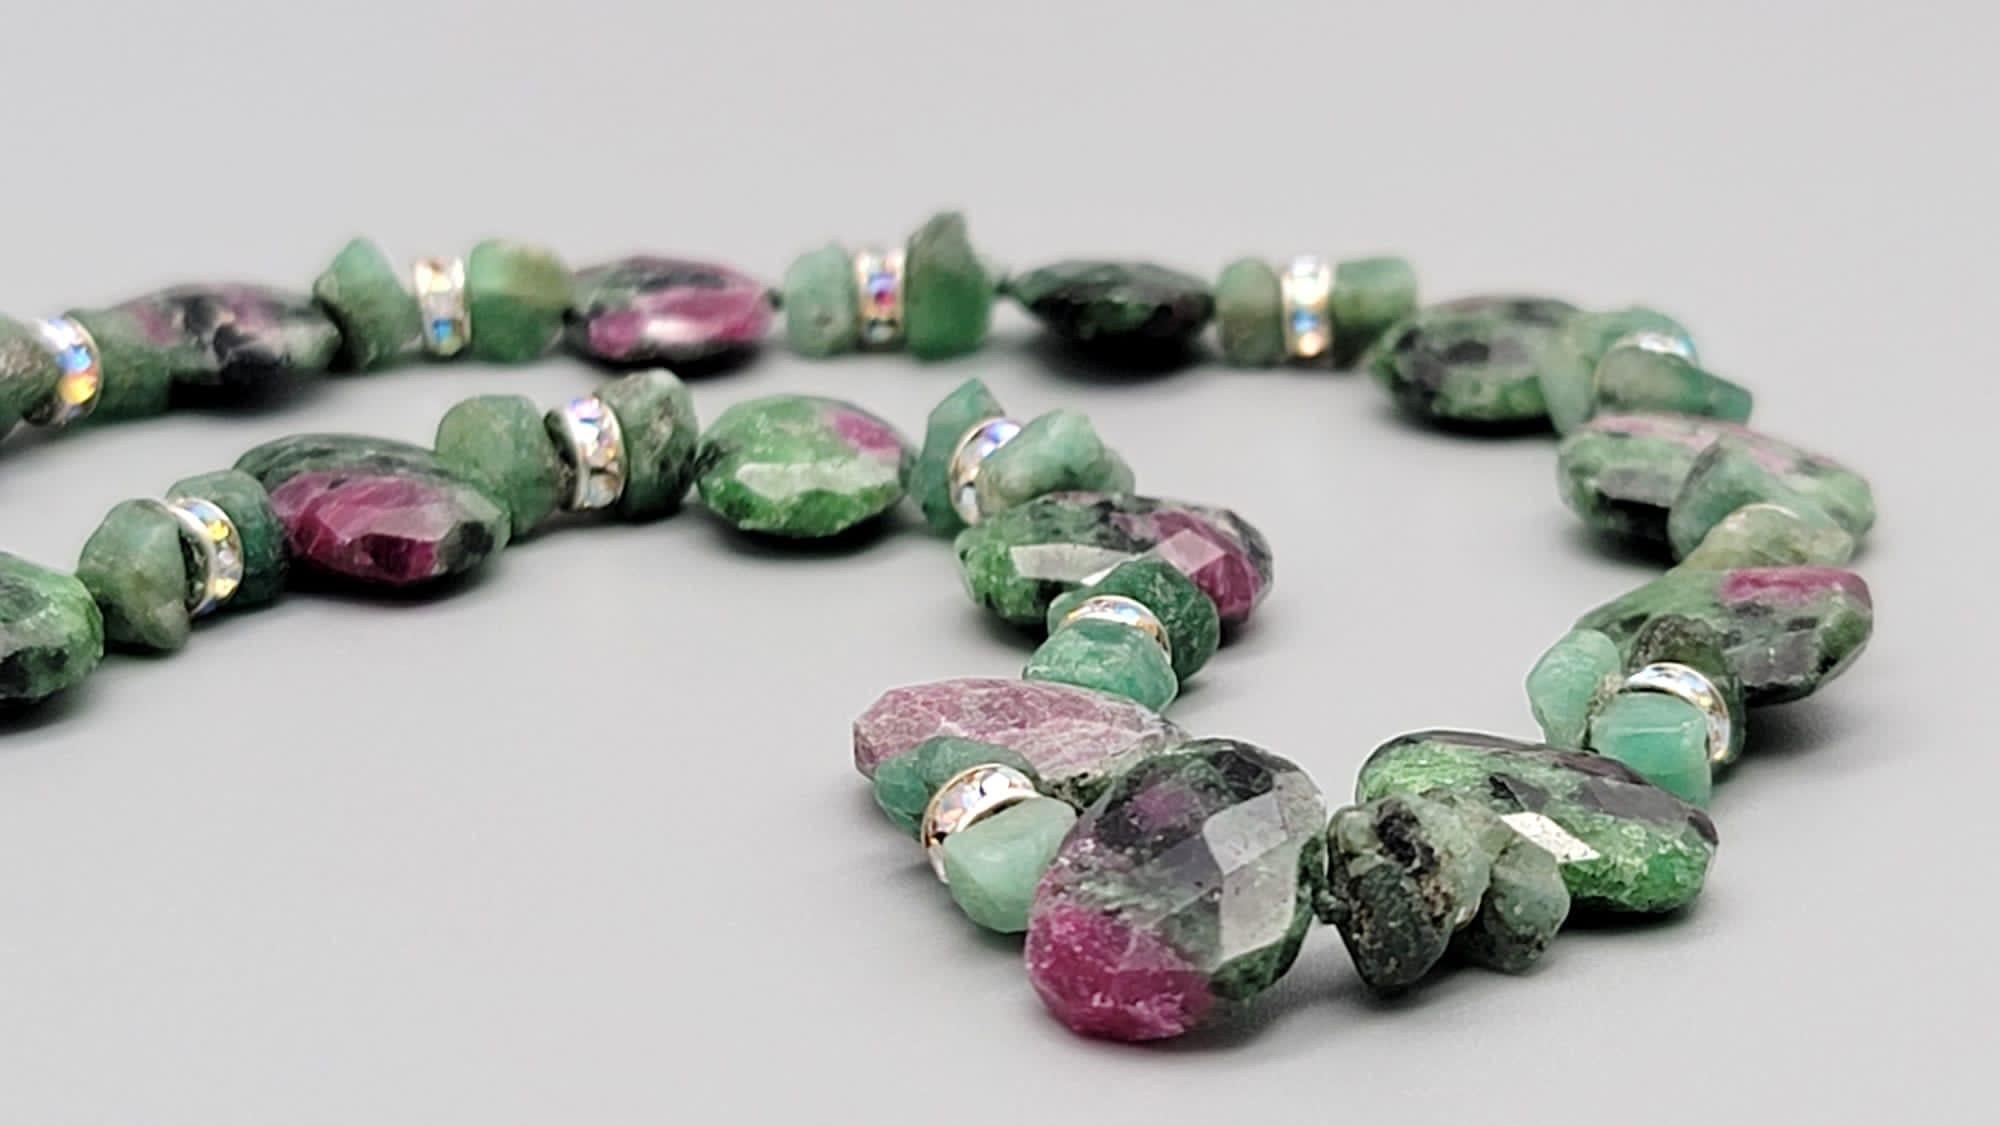 A.Jeschel Ruby in Zoisite and Emerald necklace. 1